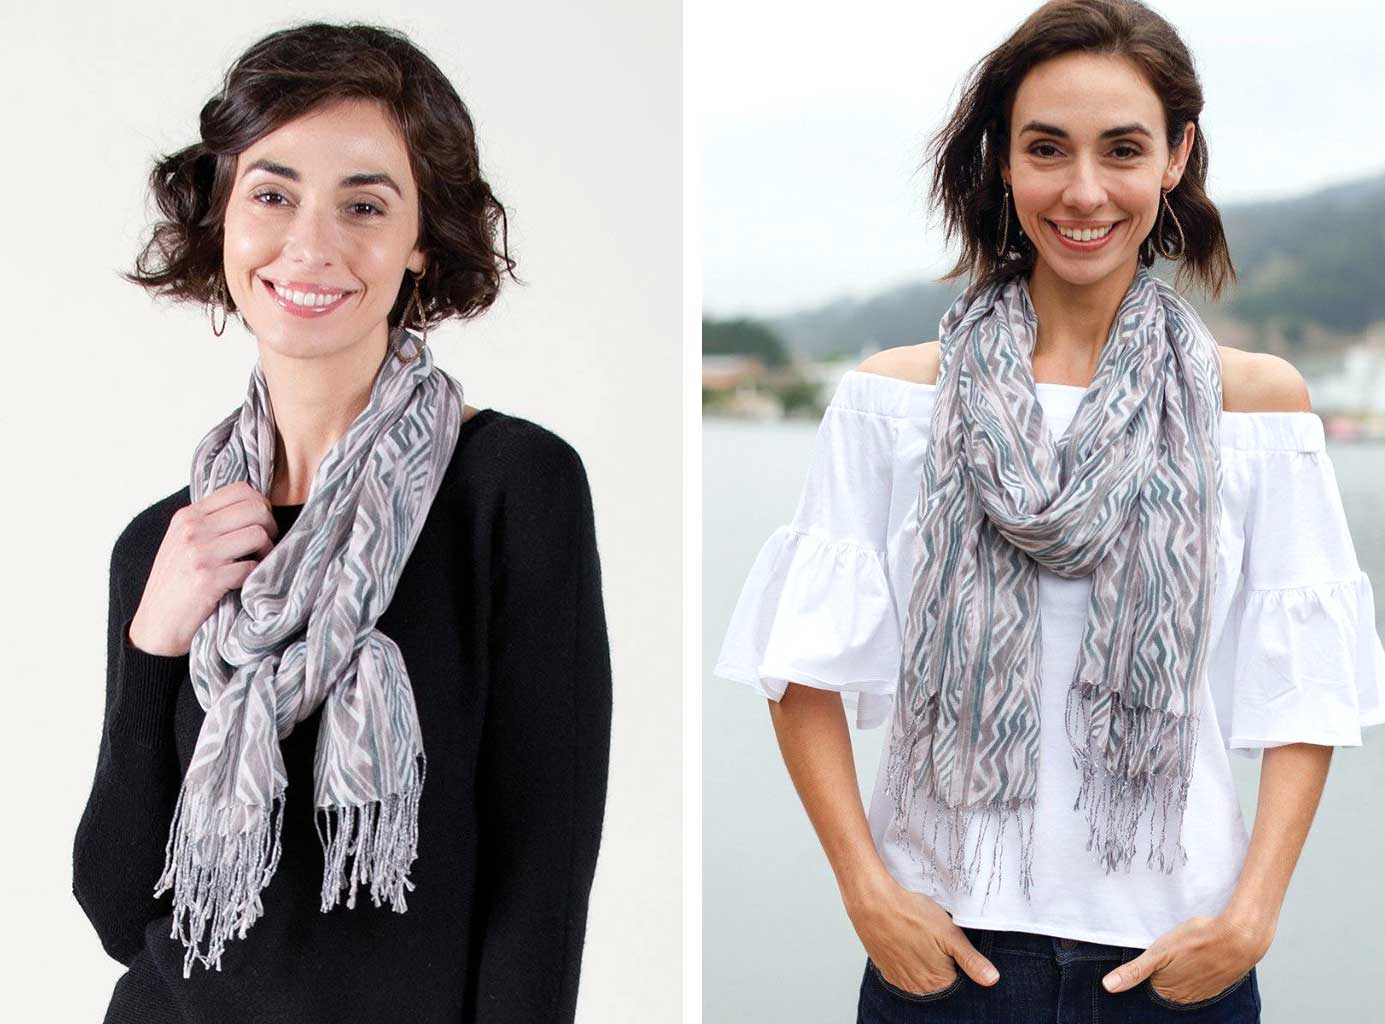 woman wearing same grey and lavender print scarf with a dark sweater on the left and a white summer shirt on the right